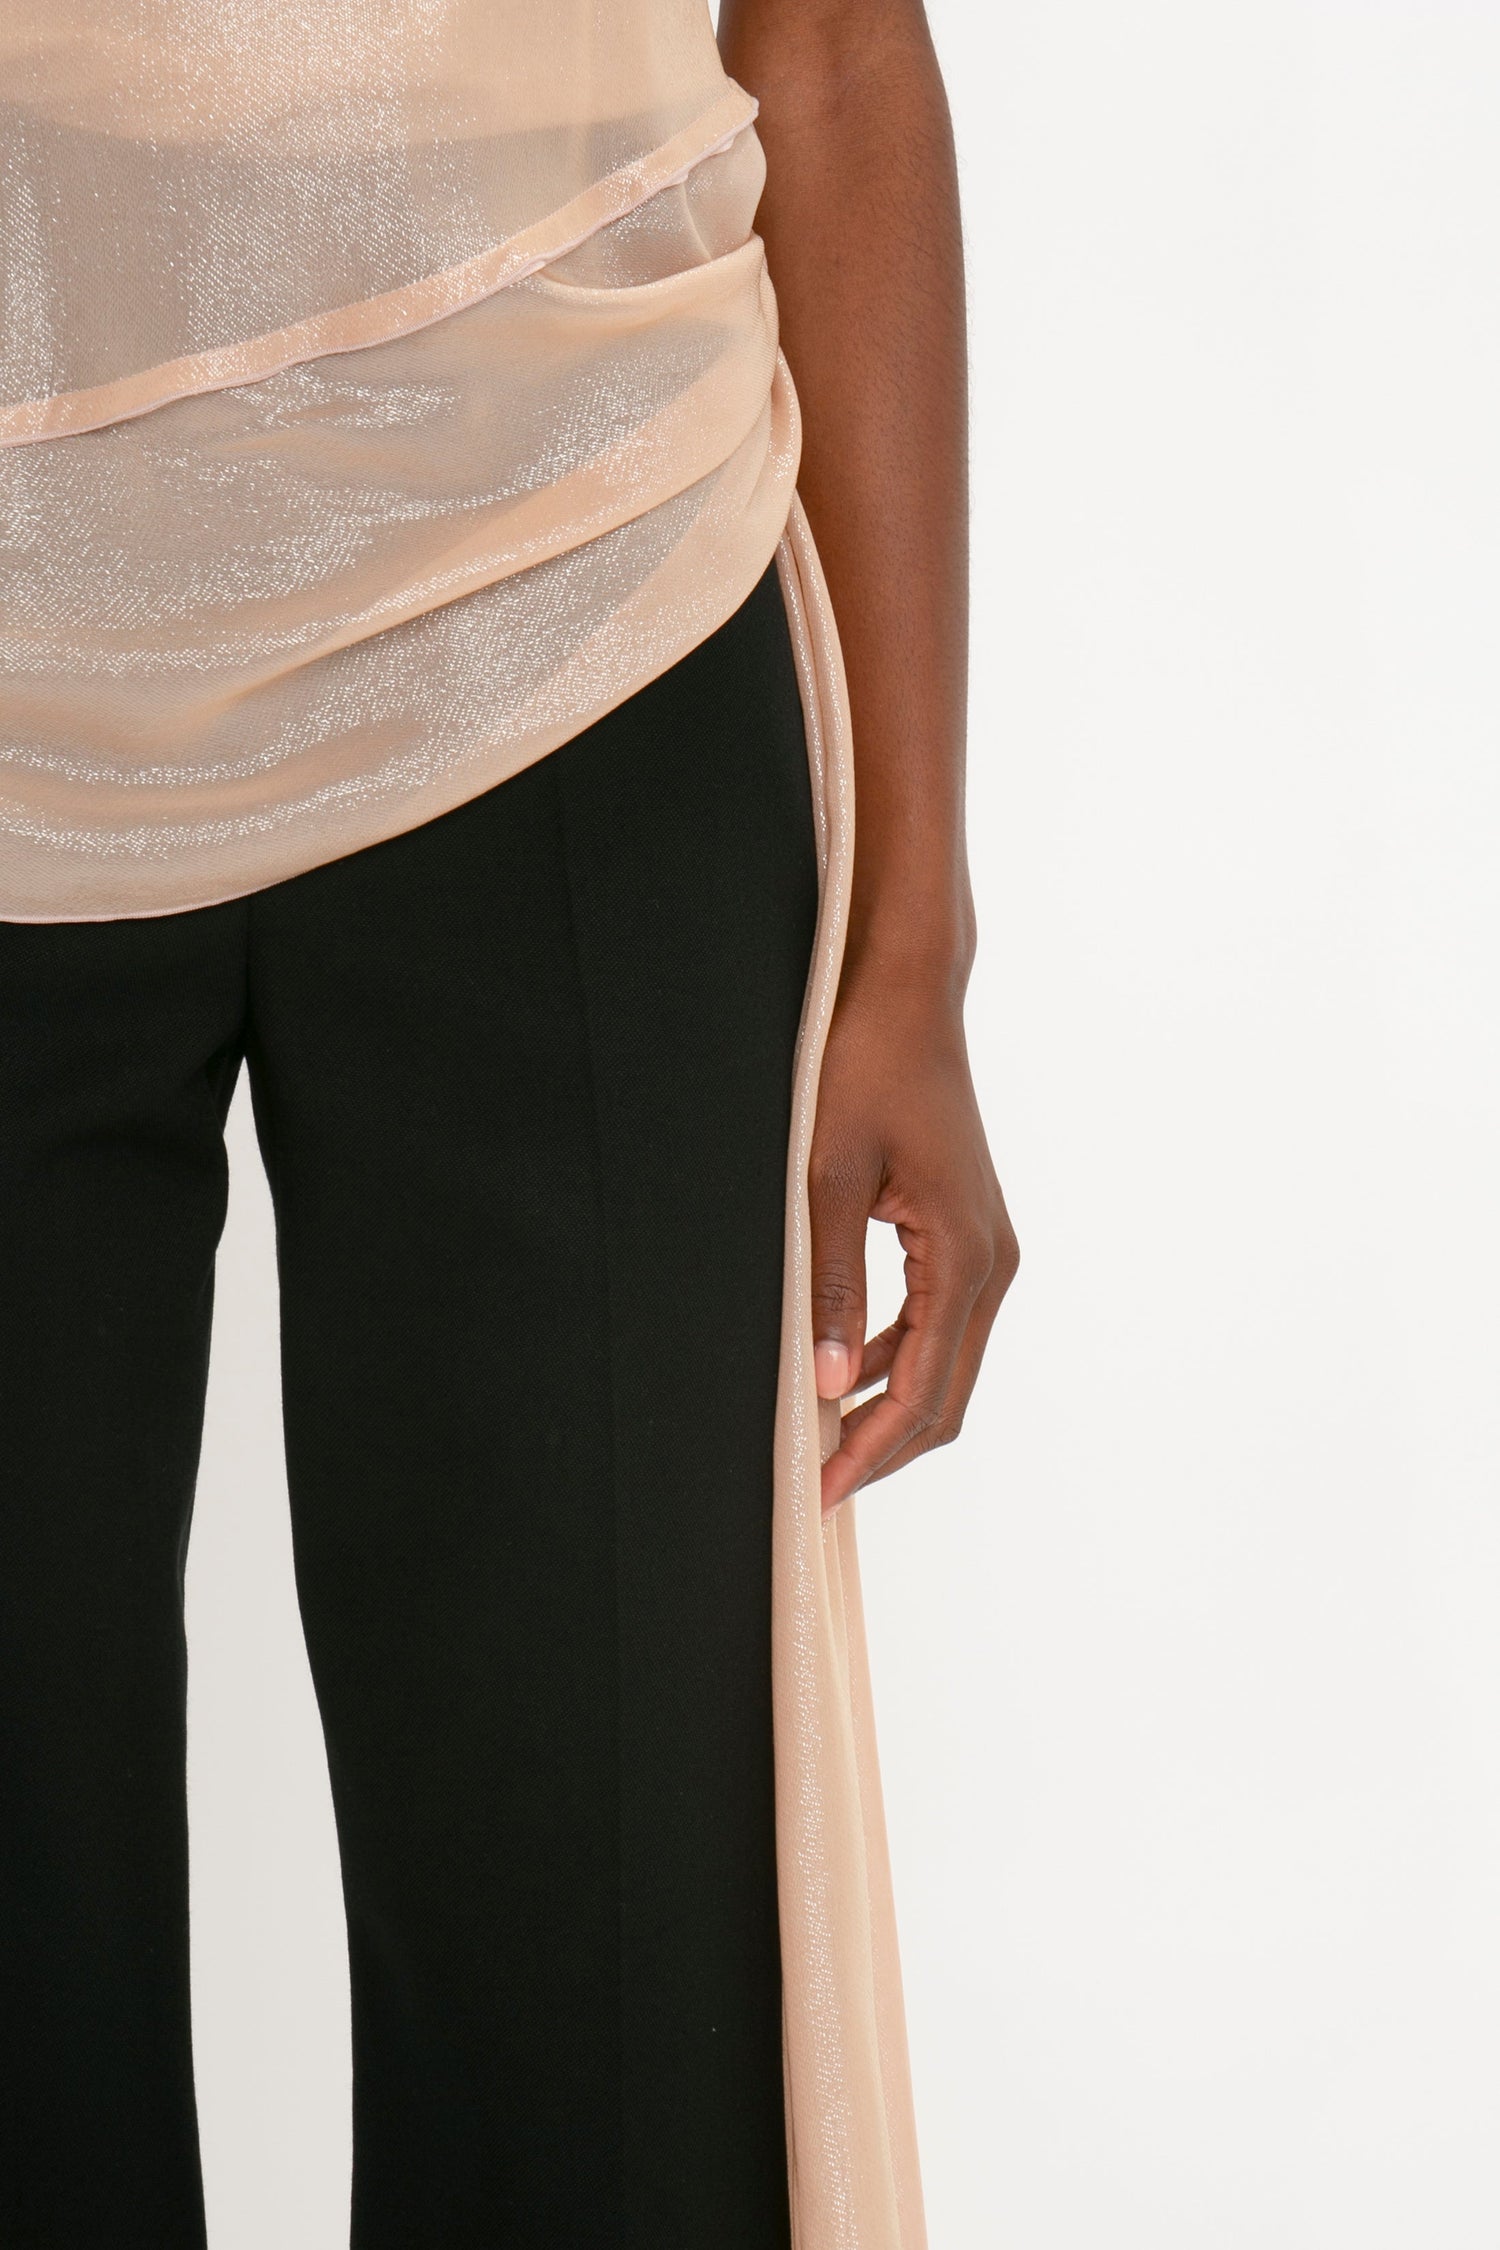 Partial view of a person wearing a shimmering beige halter top with draped fabric and black Satin Panel Straight Leg Trousers, standing against a plain white background.

Revised Sentence:
Partial view of a person wearing a Flower Detail Cami Top In Rosewater by Victoria Beckham with draped fabric and black Satin Panel Straight Leg Trousers, standing against a plain white background.